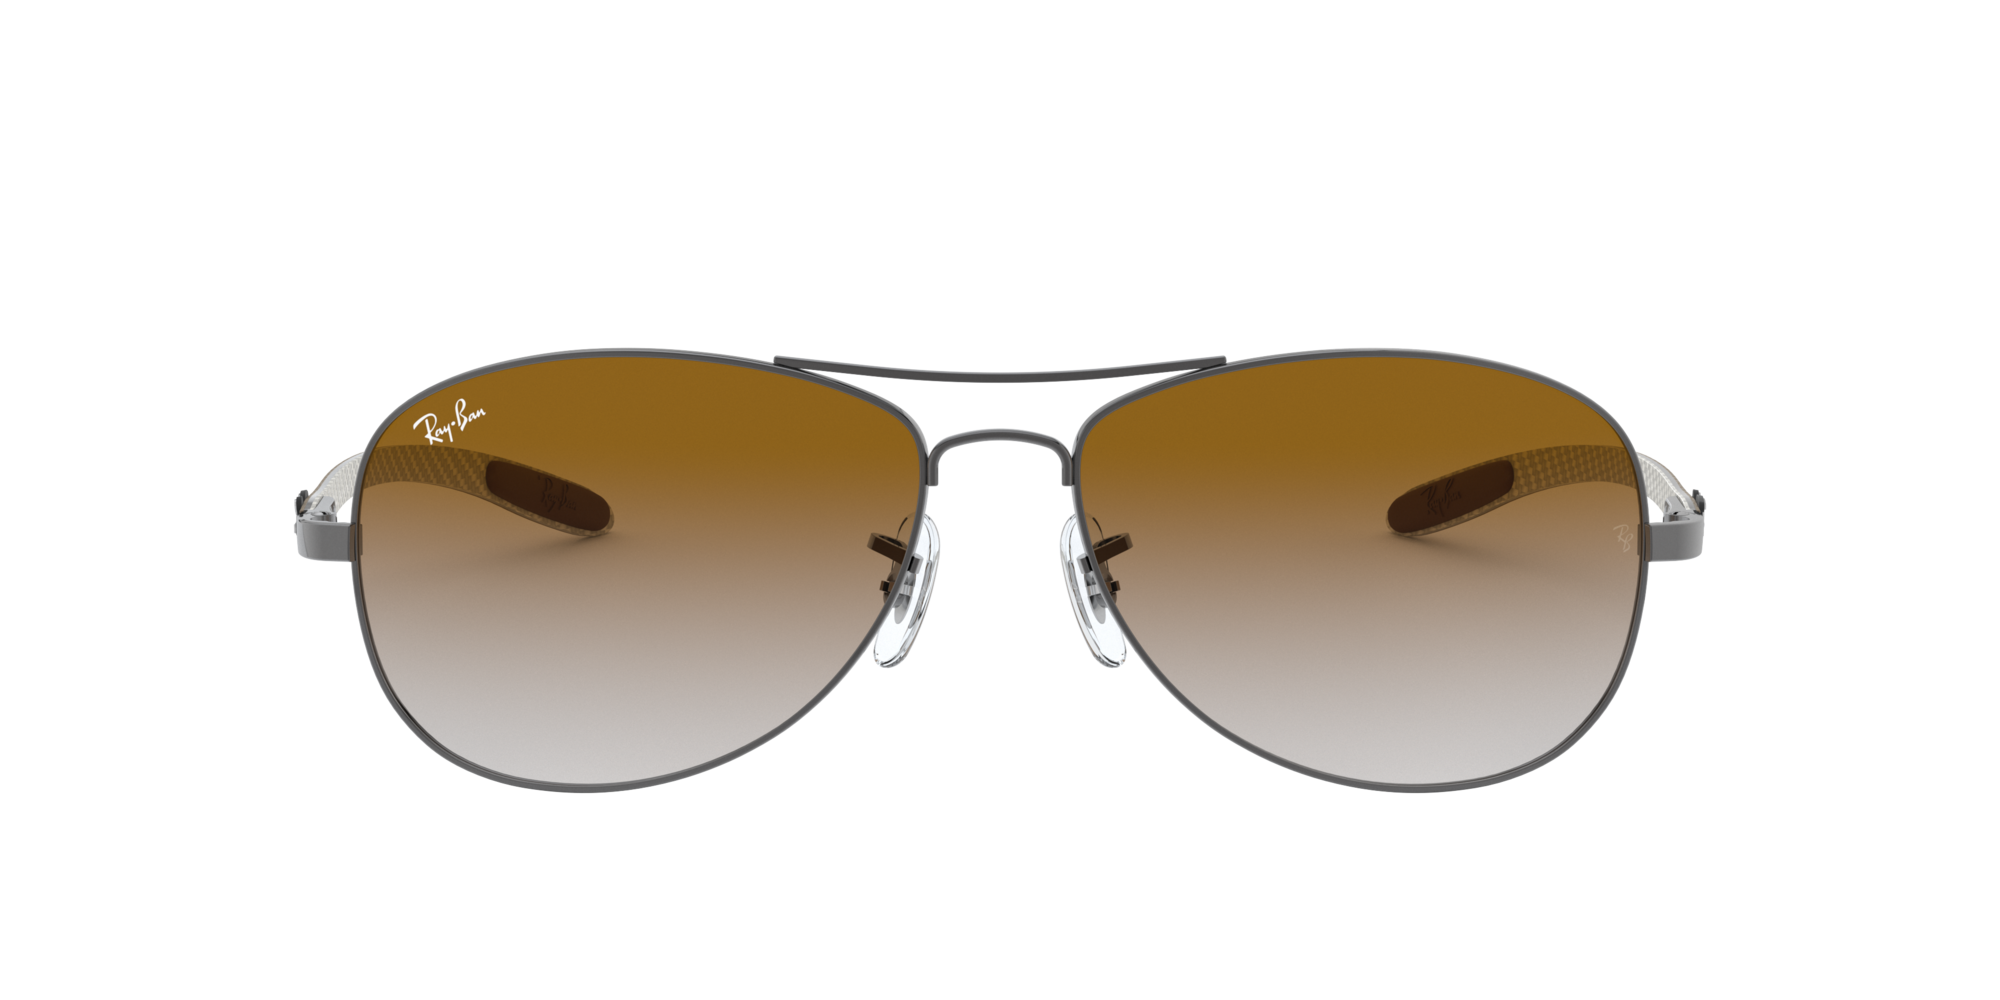 ray ban rb8301 price in india